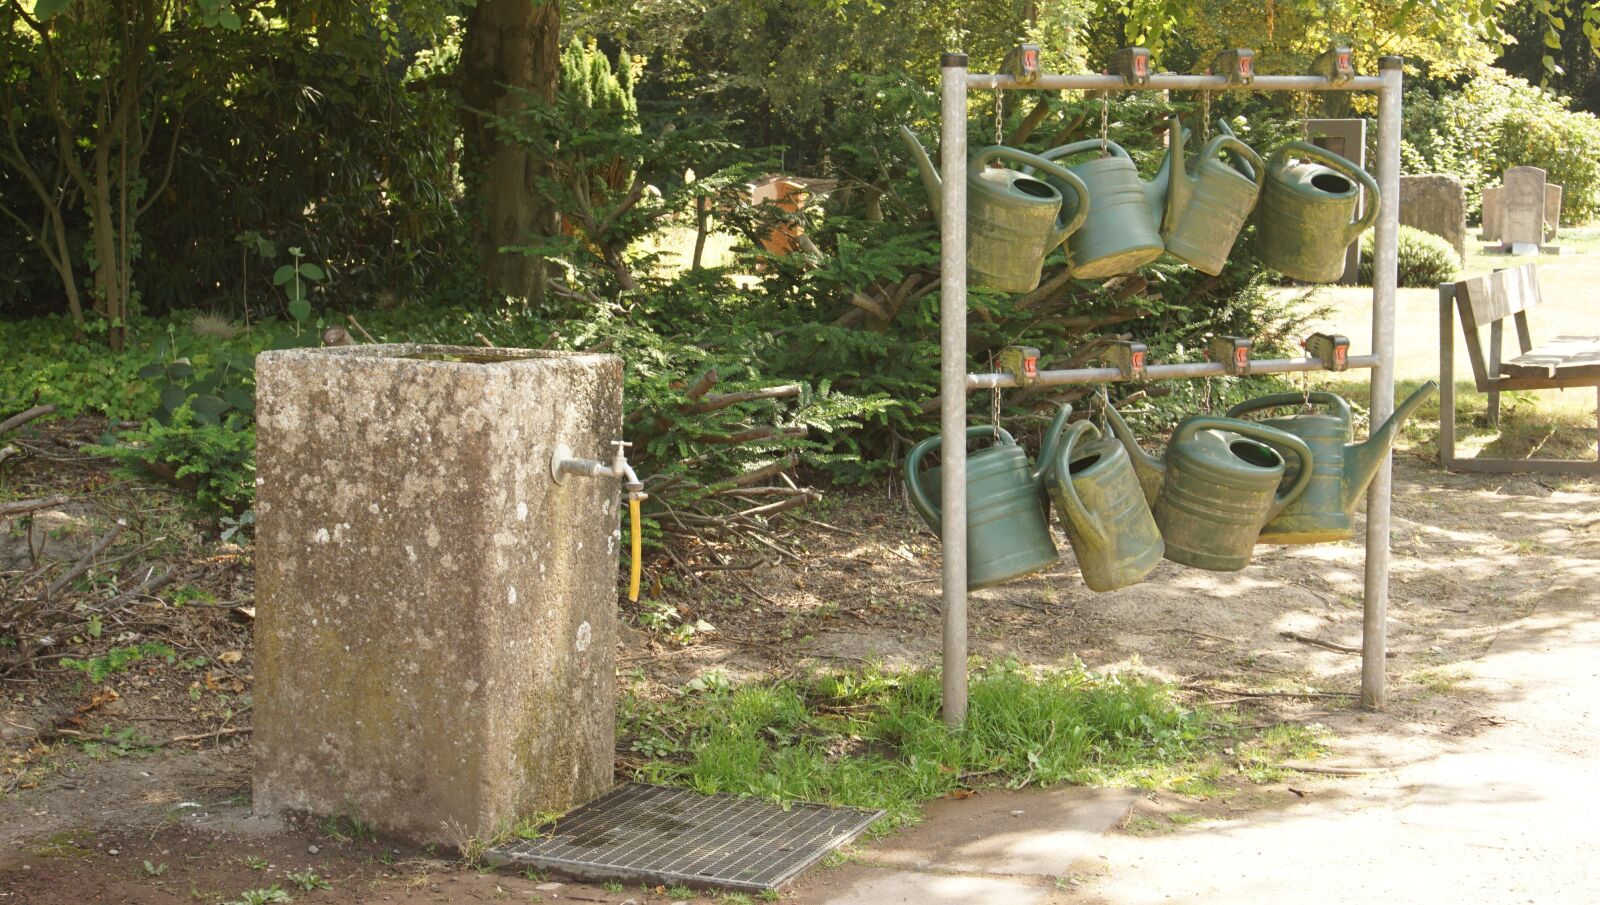 Sony a6000 sample photo. "Cemetery, watering cans, mood" photography